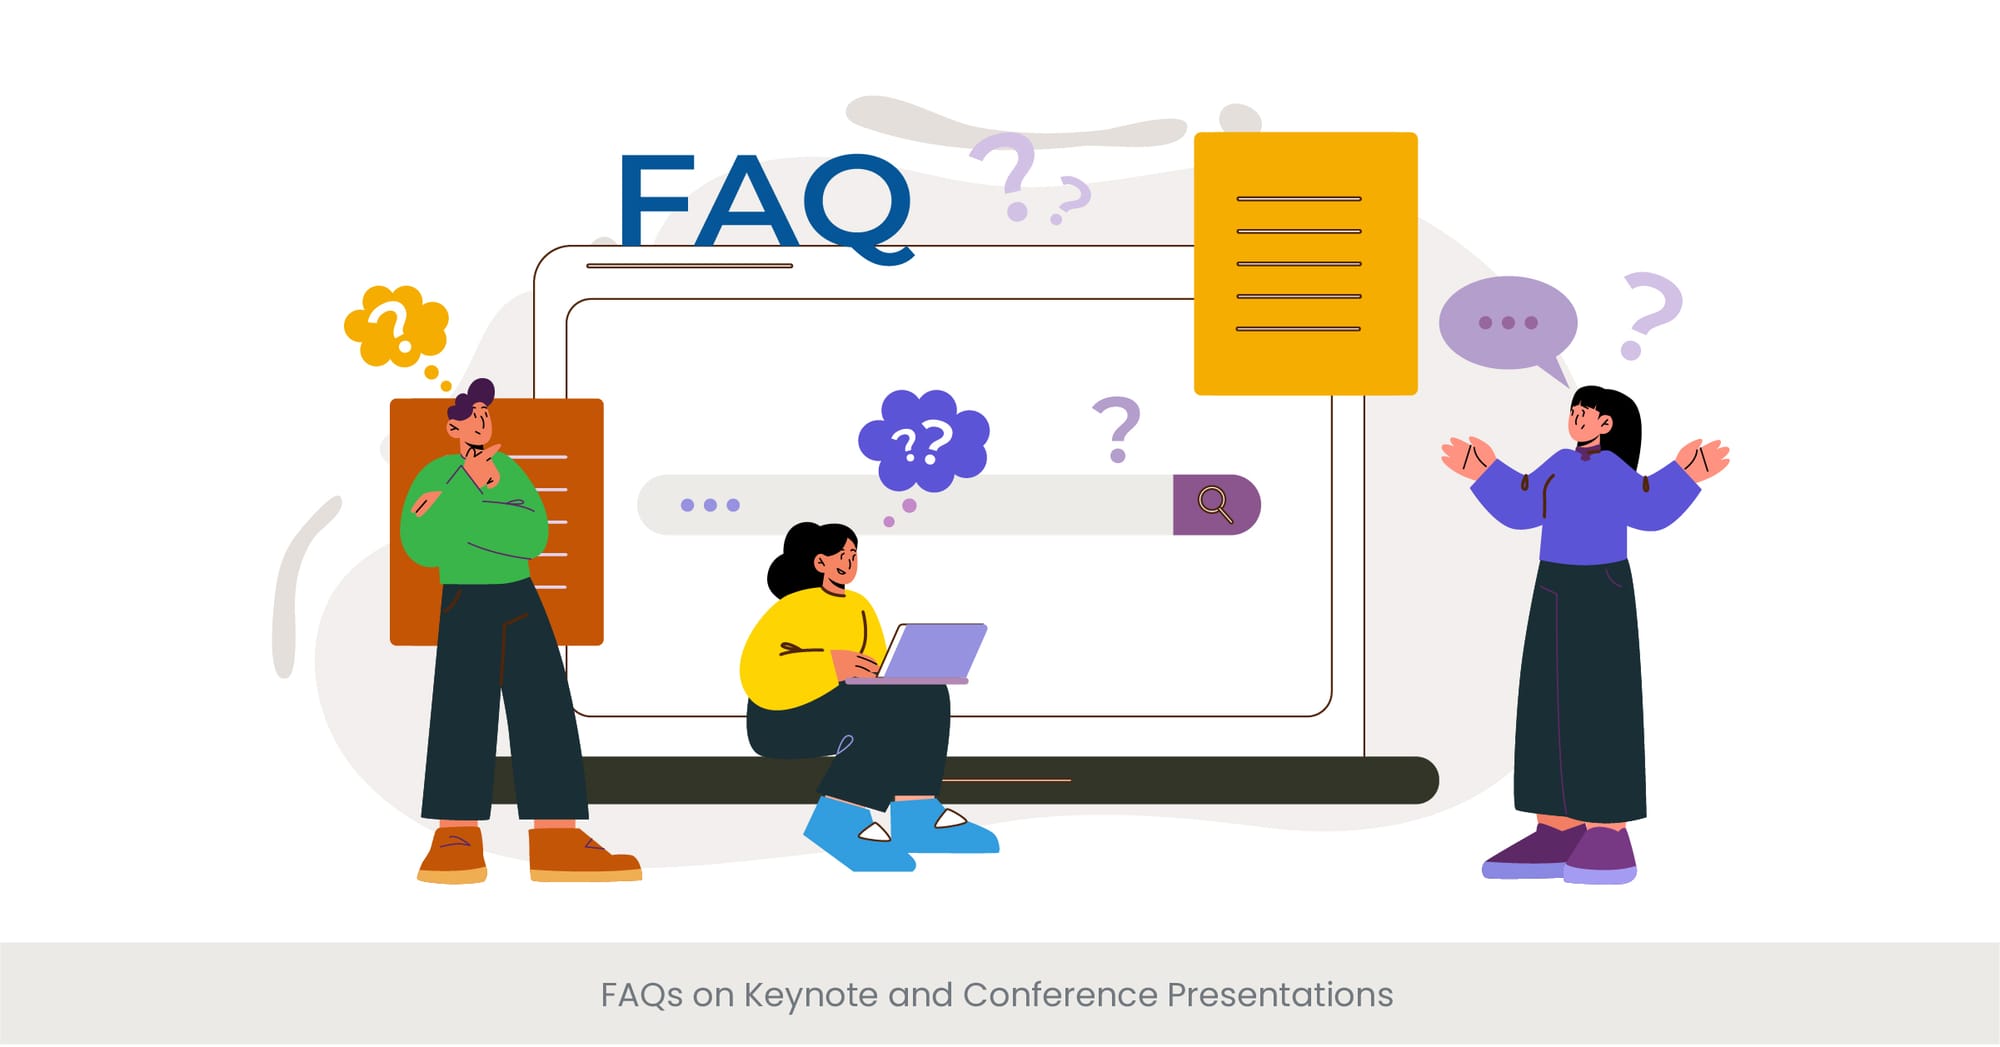 FAQs on Keynote and Conference Presentations